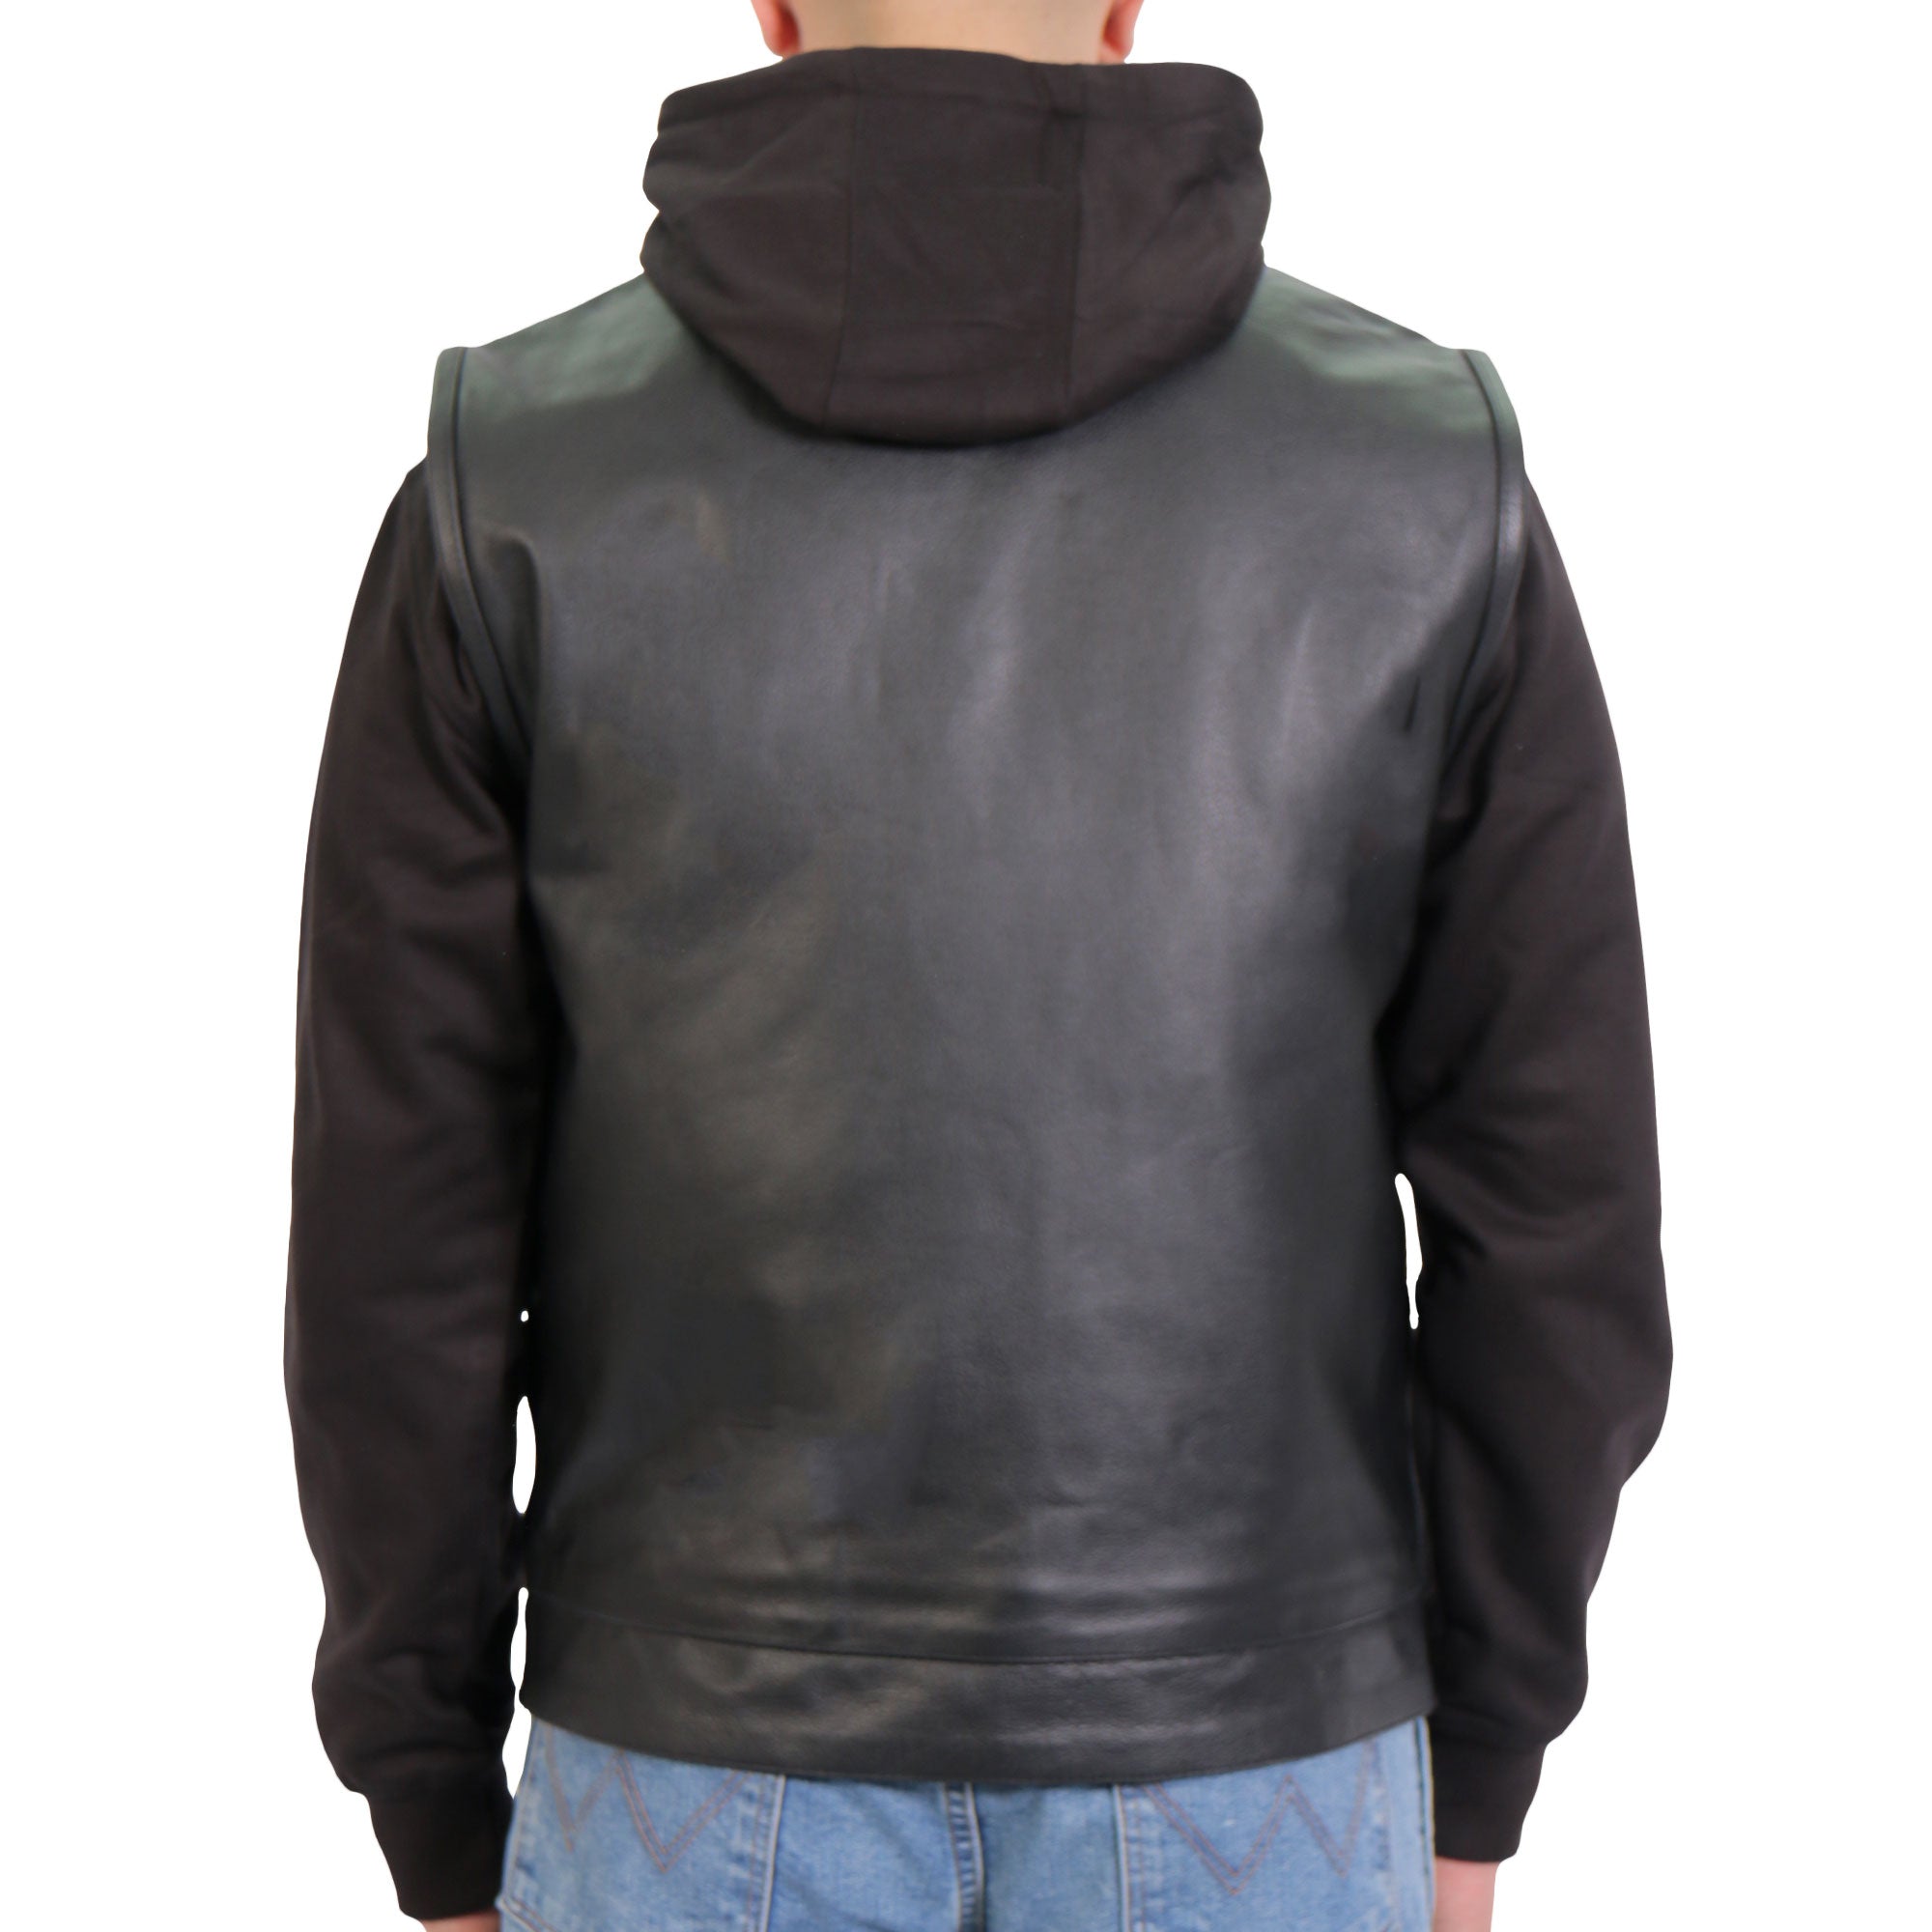 Hot Leathers Men's Black '2-in-1' Conceal and Carry Leather Vest with Hoodie VSM1202